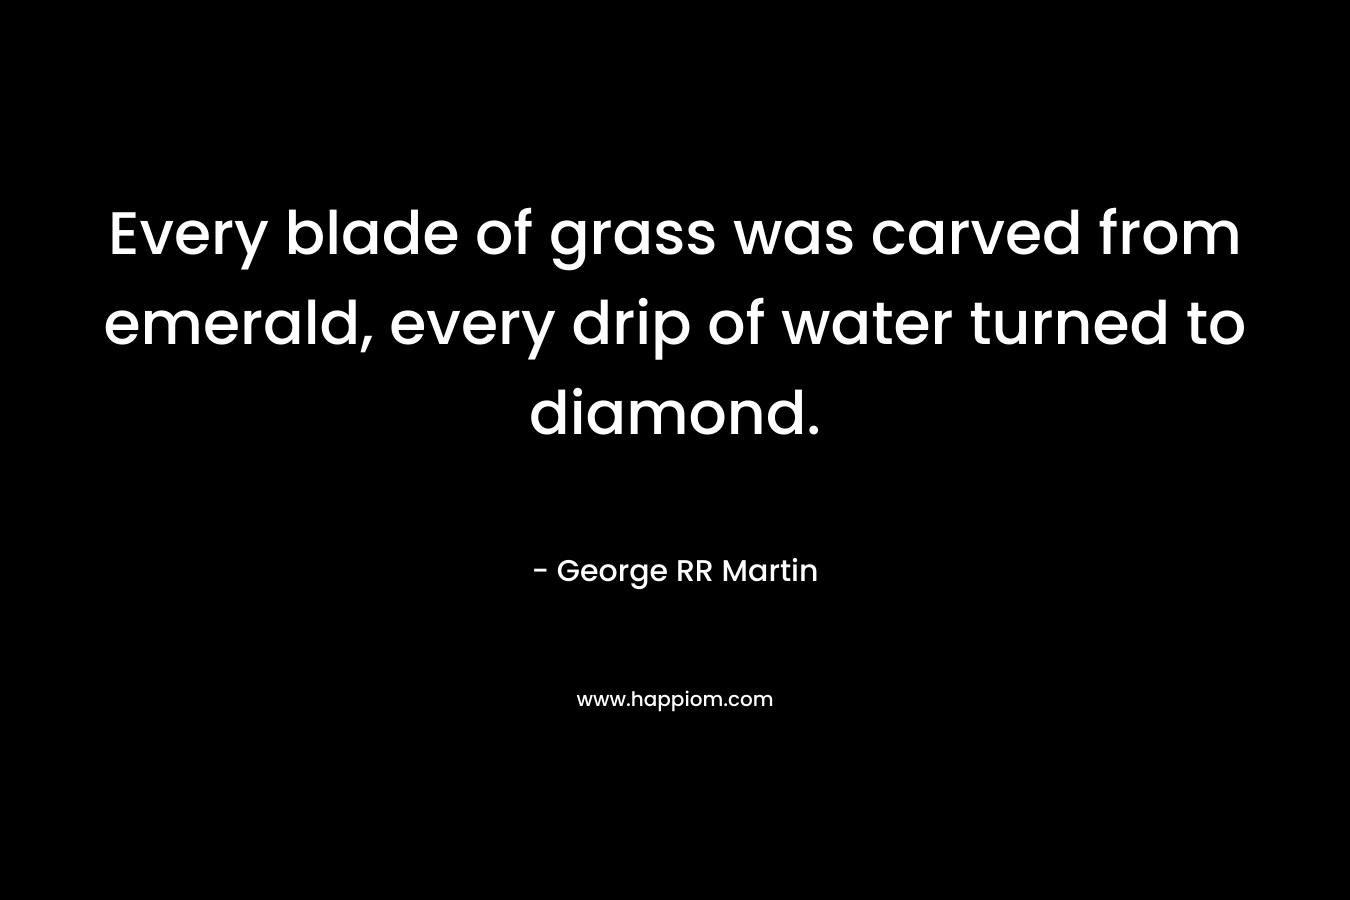 Every blade of grass was carved from emerald, every drip of water turned to diamond.